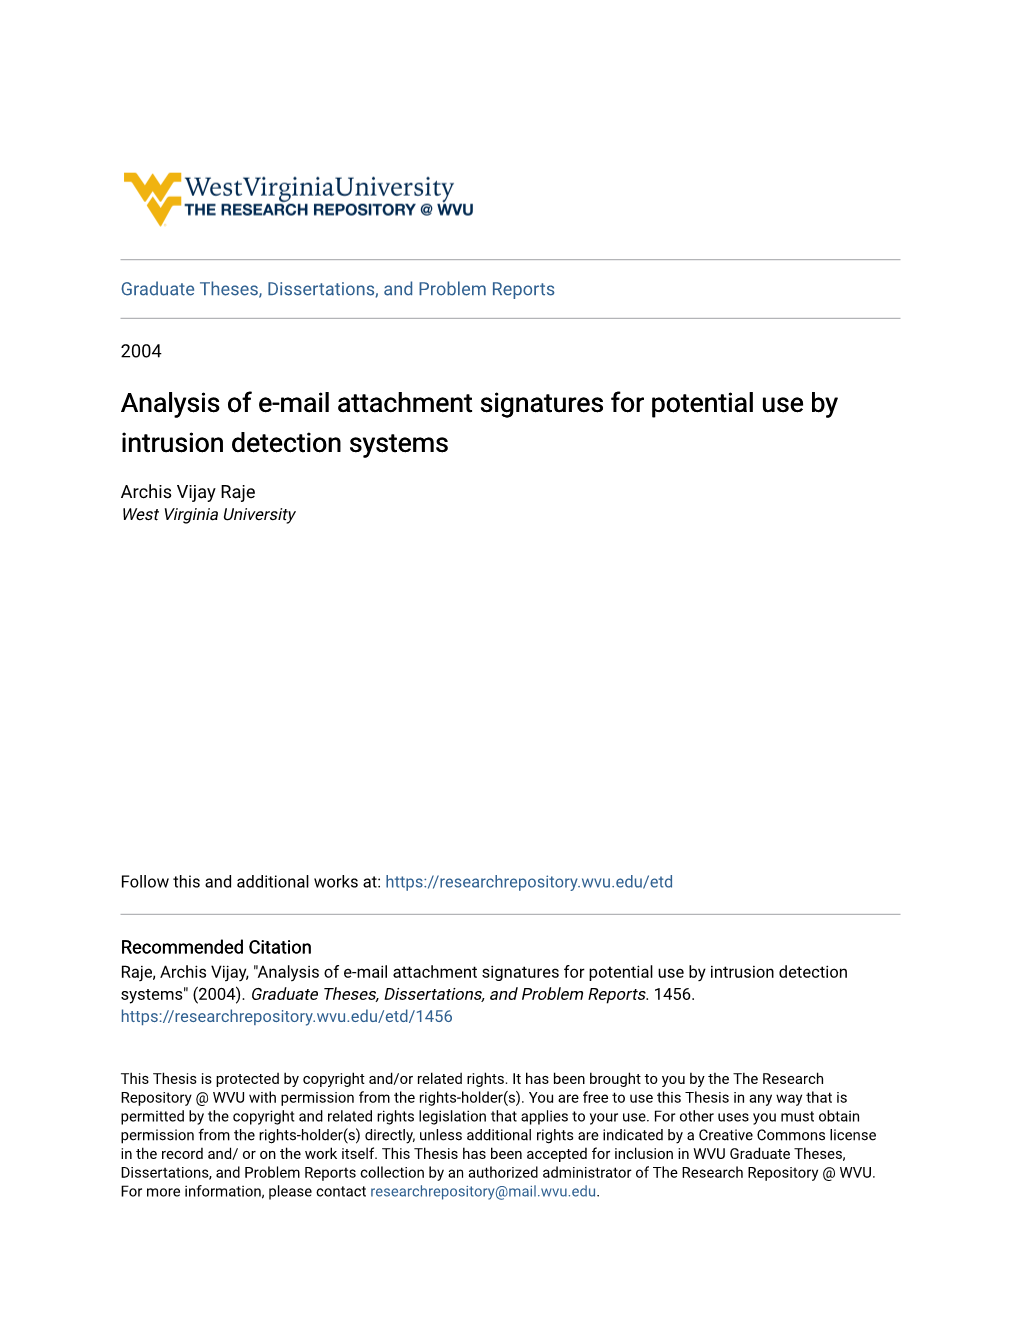 Analysis of E-Mail Attachment Signatures for Potential Use by Intrusion Detection Systems